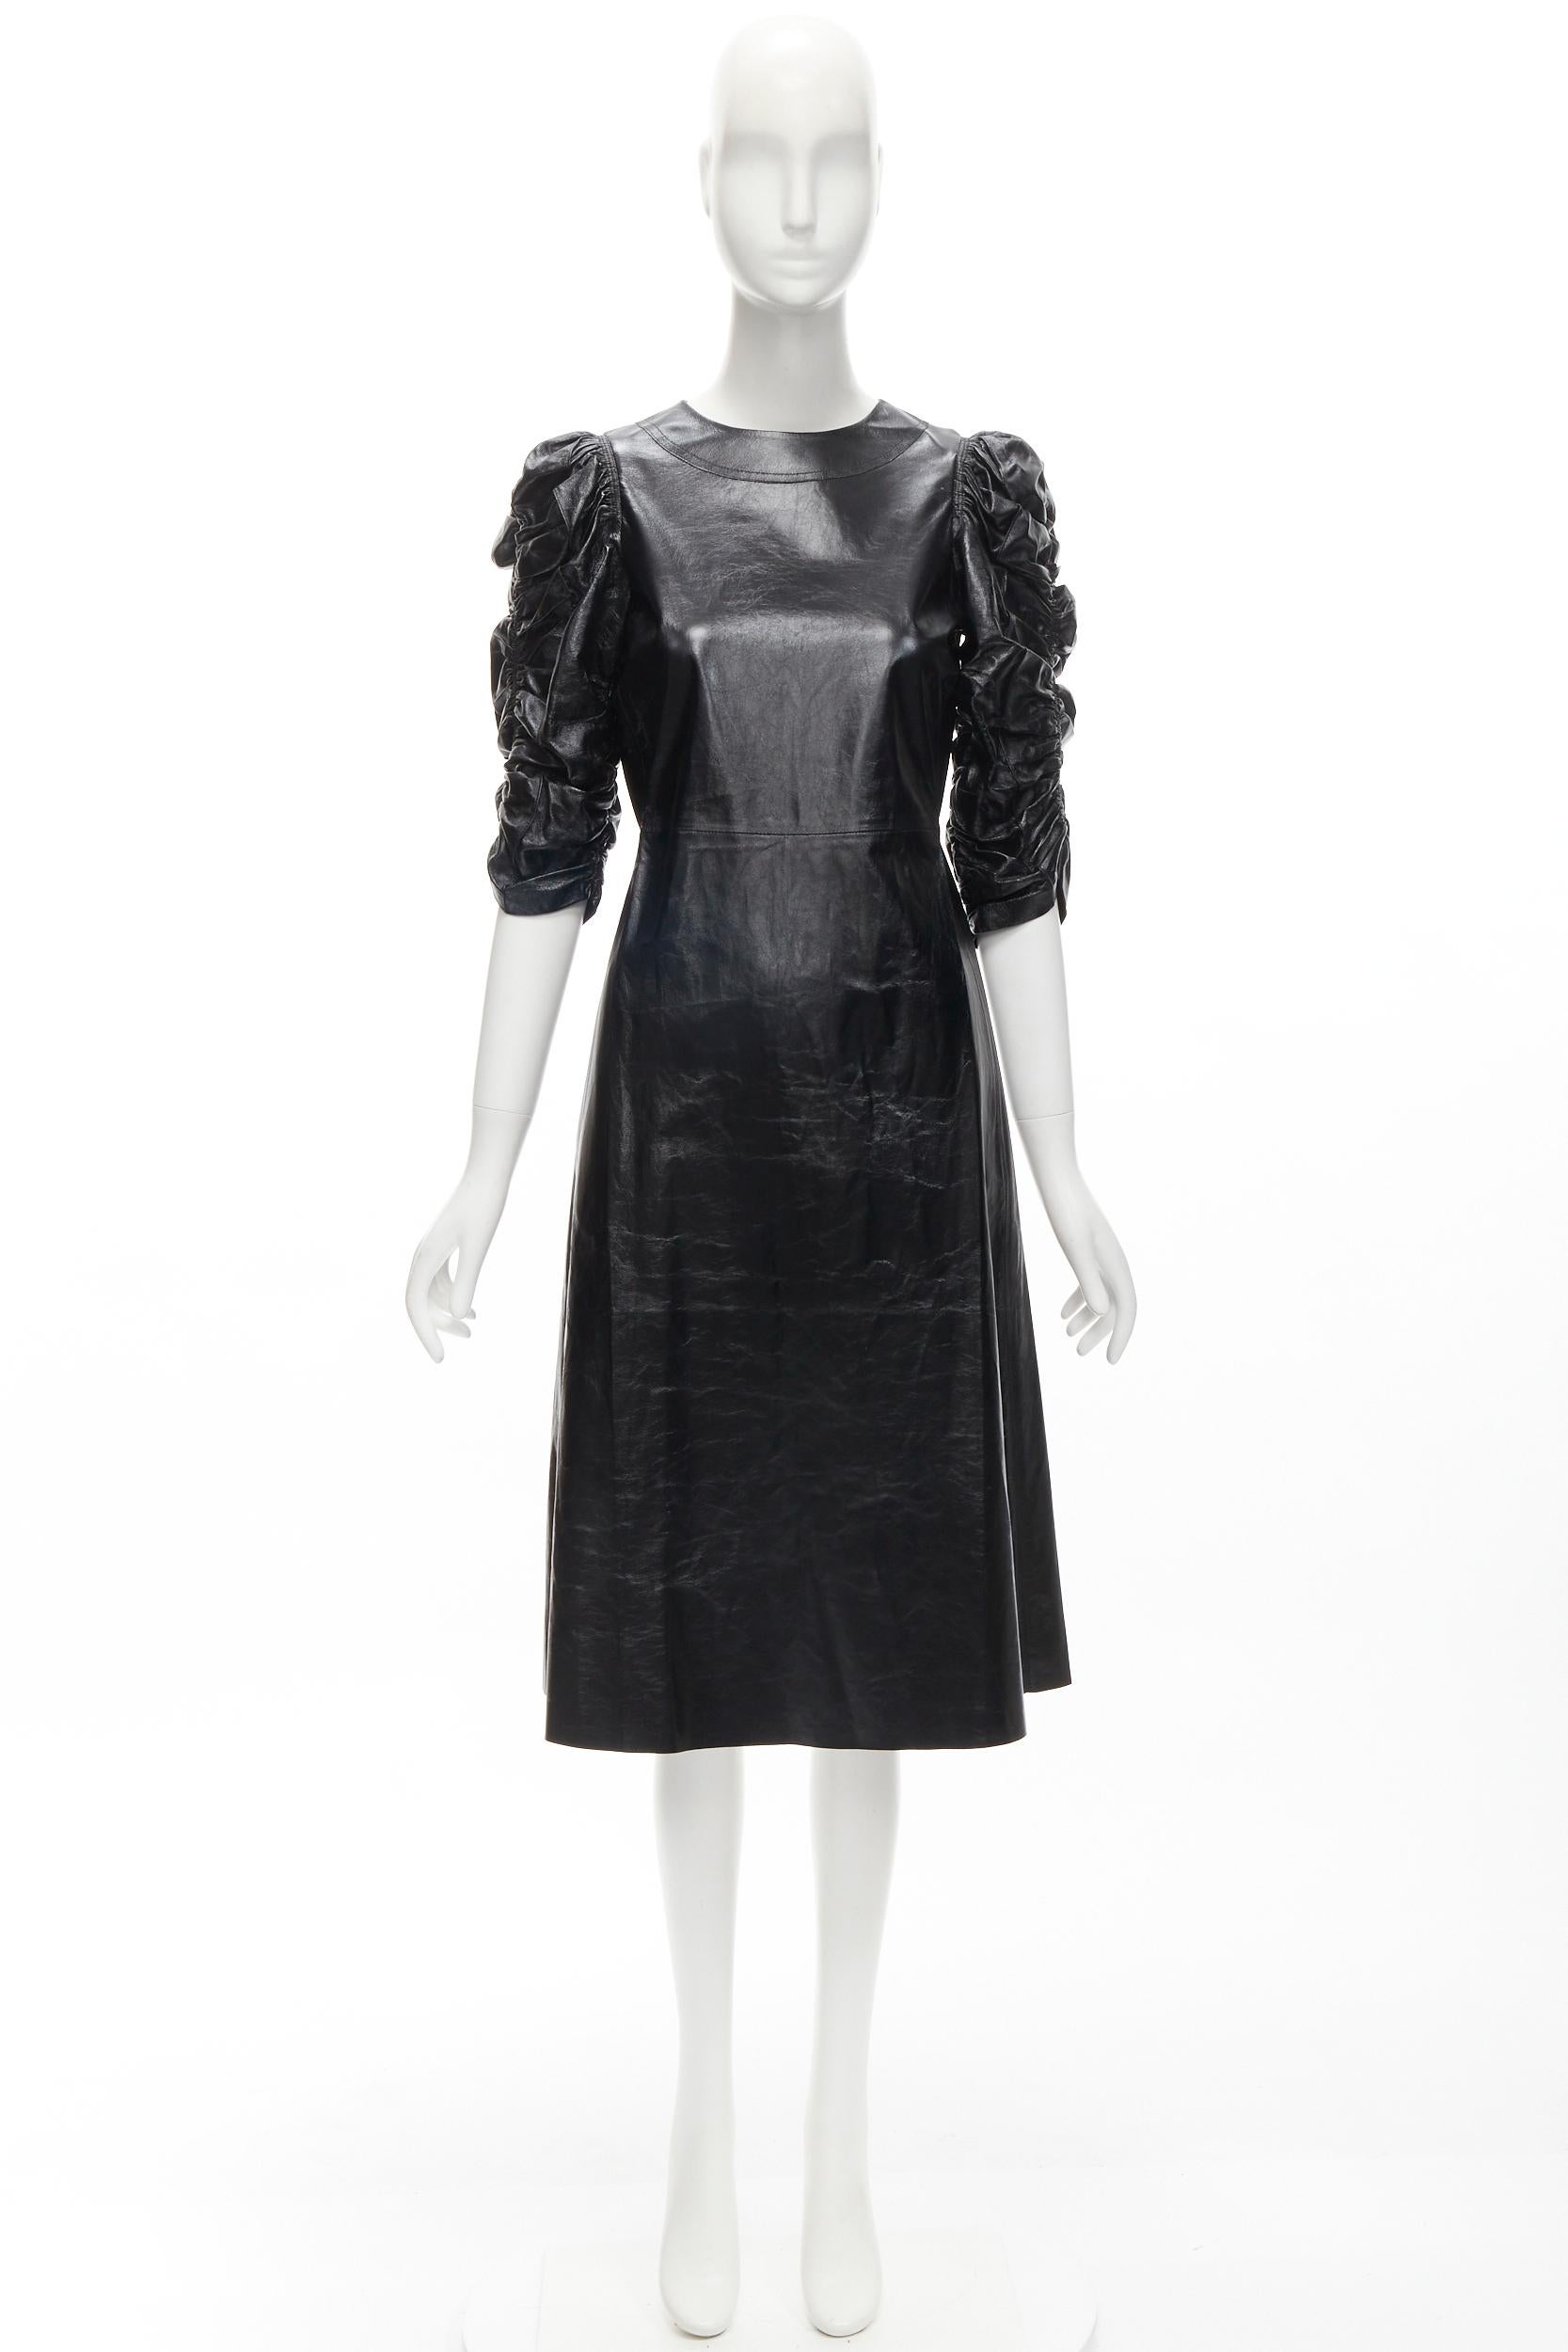 rare OLD CELINE Phoebe Philo black shiney lambskin rusched sleeve dress FR36 S For Sale 4